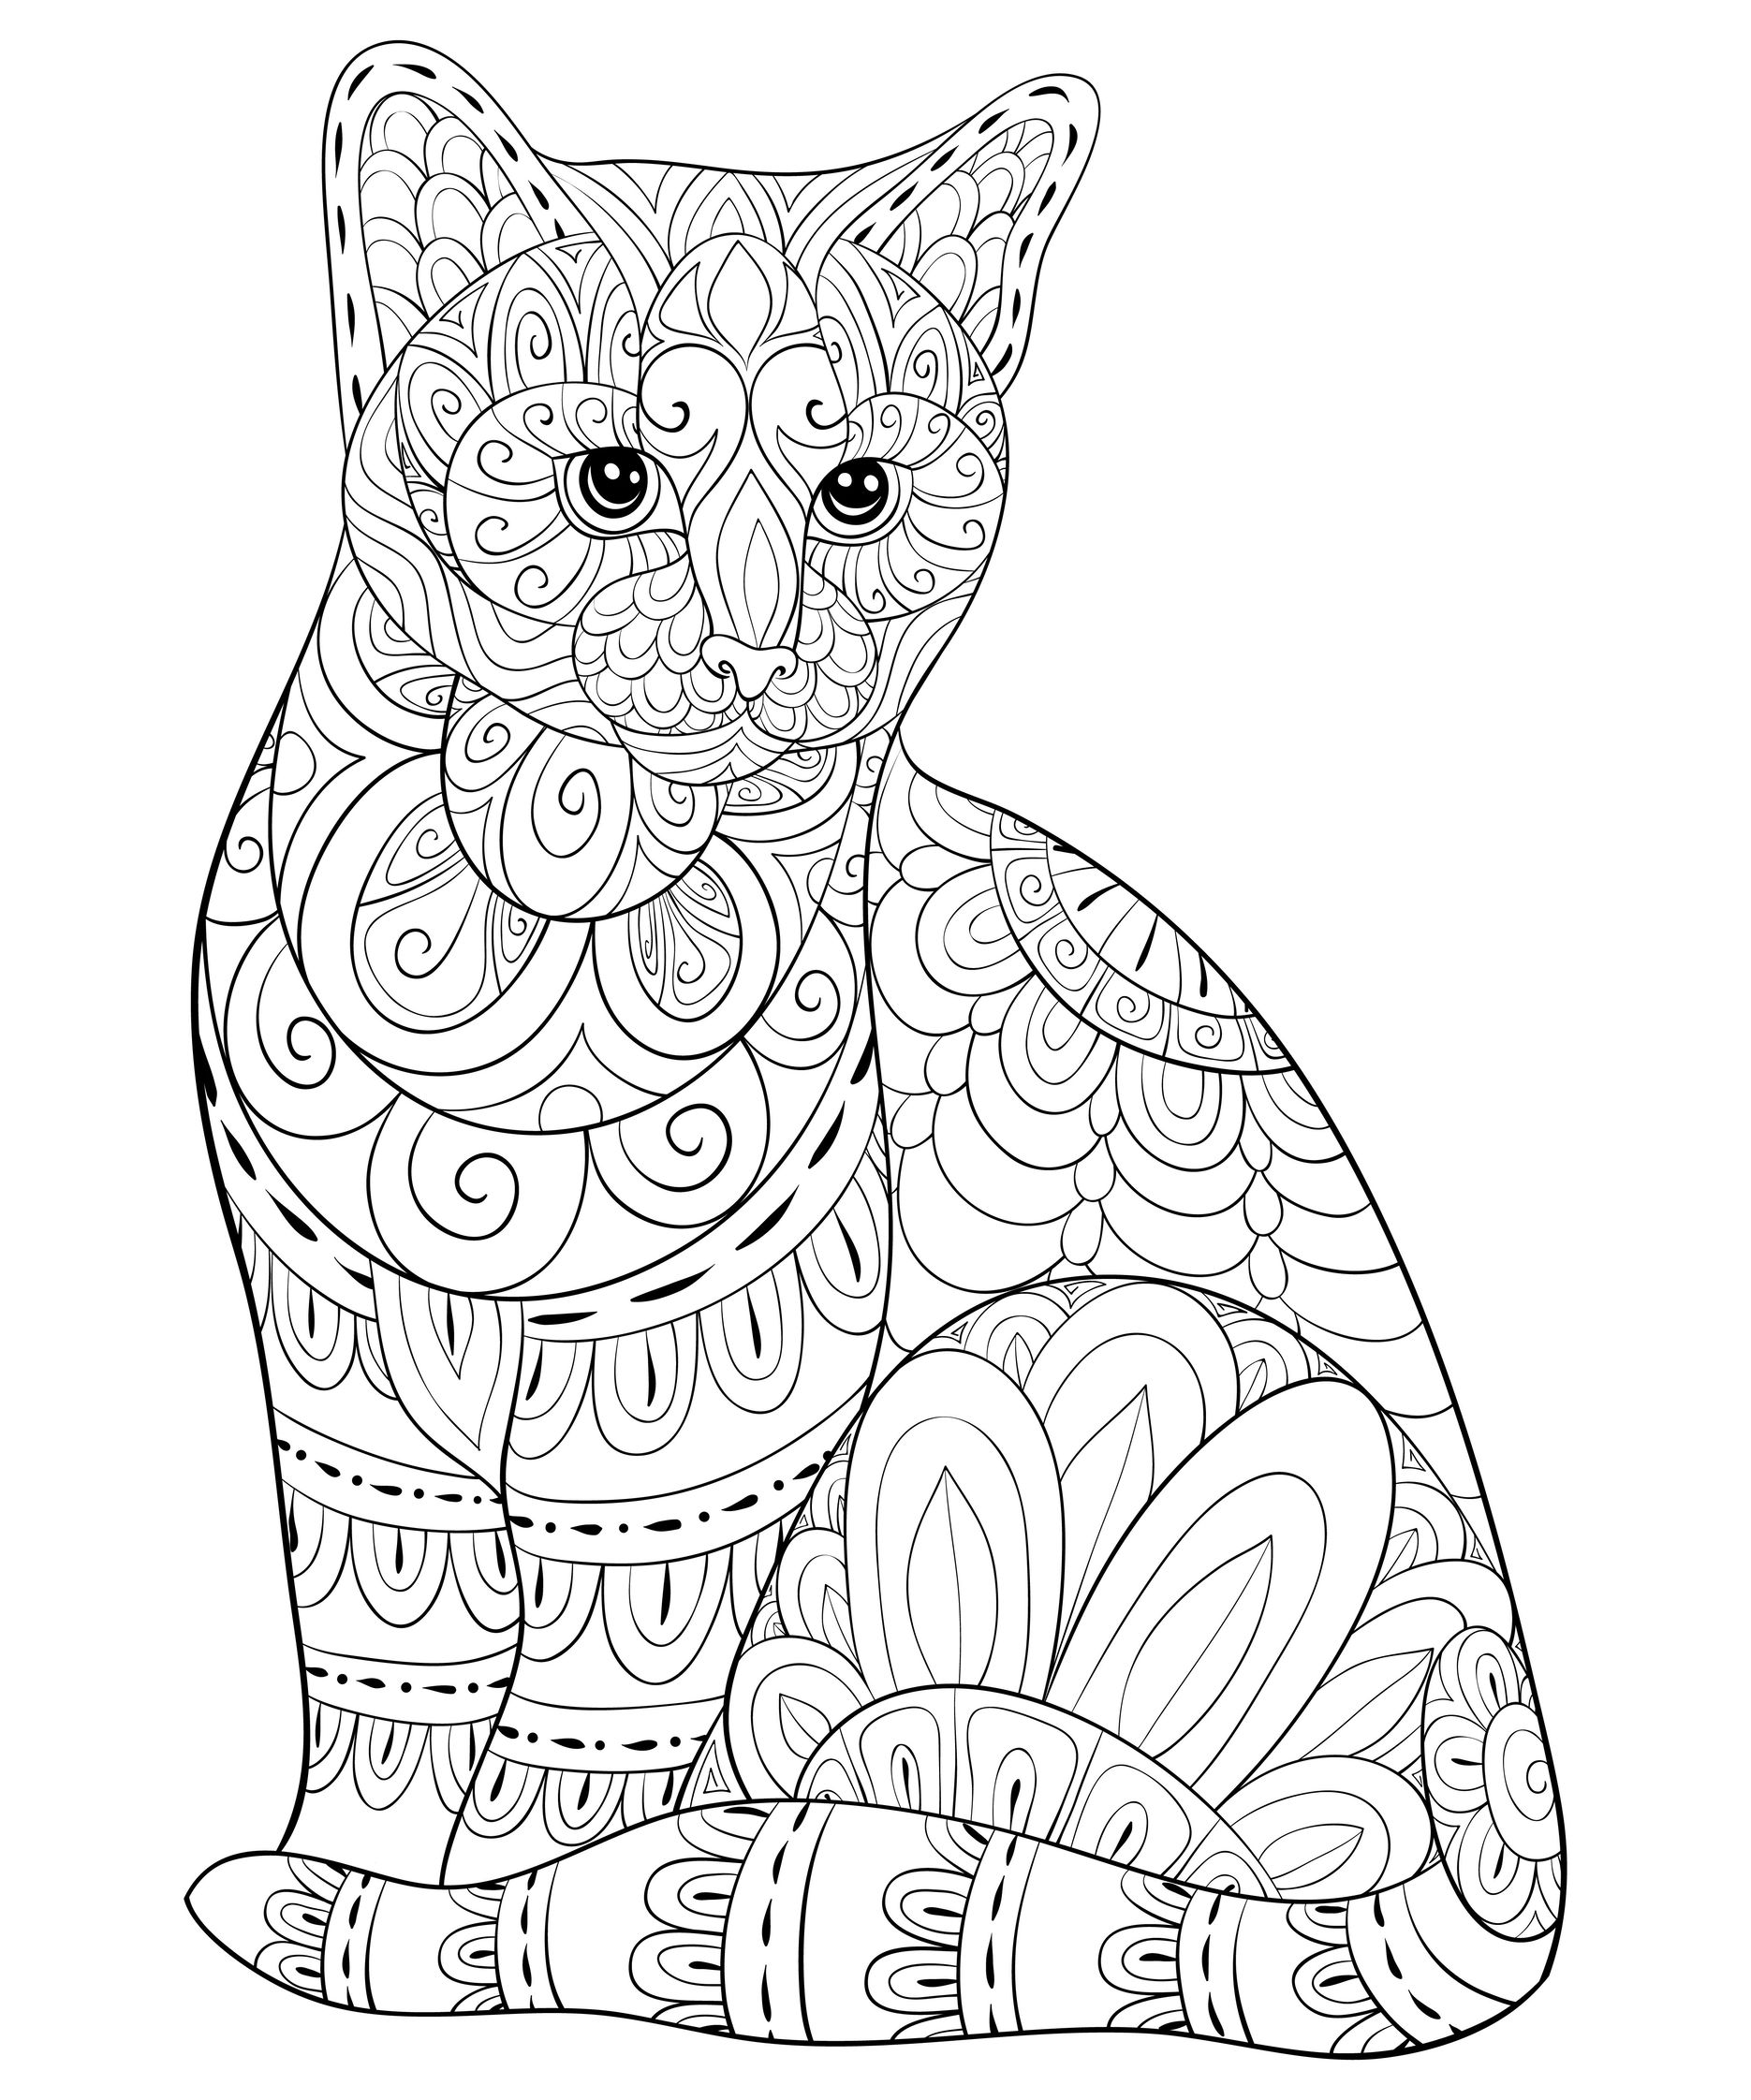 Cat in details Coloring Pages - Cat Coloring Pages - Coloring Pages For